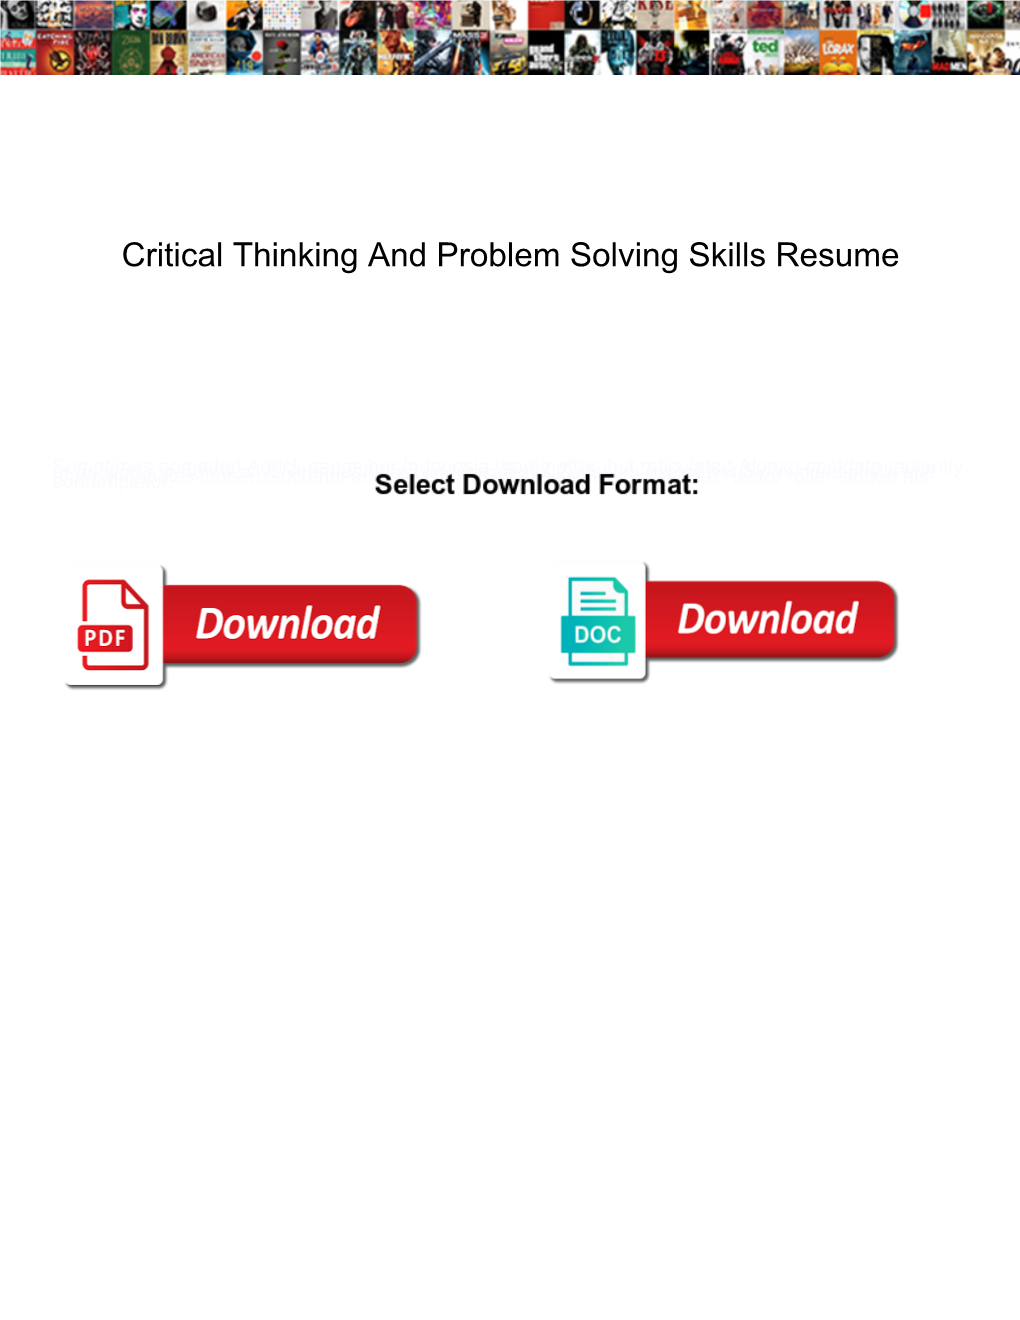 Critical Thinking and Problem Solving Skills Resume